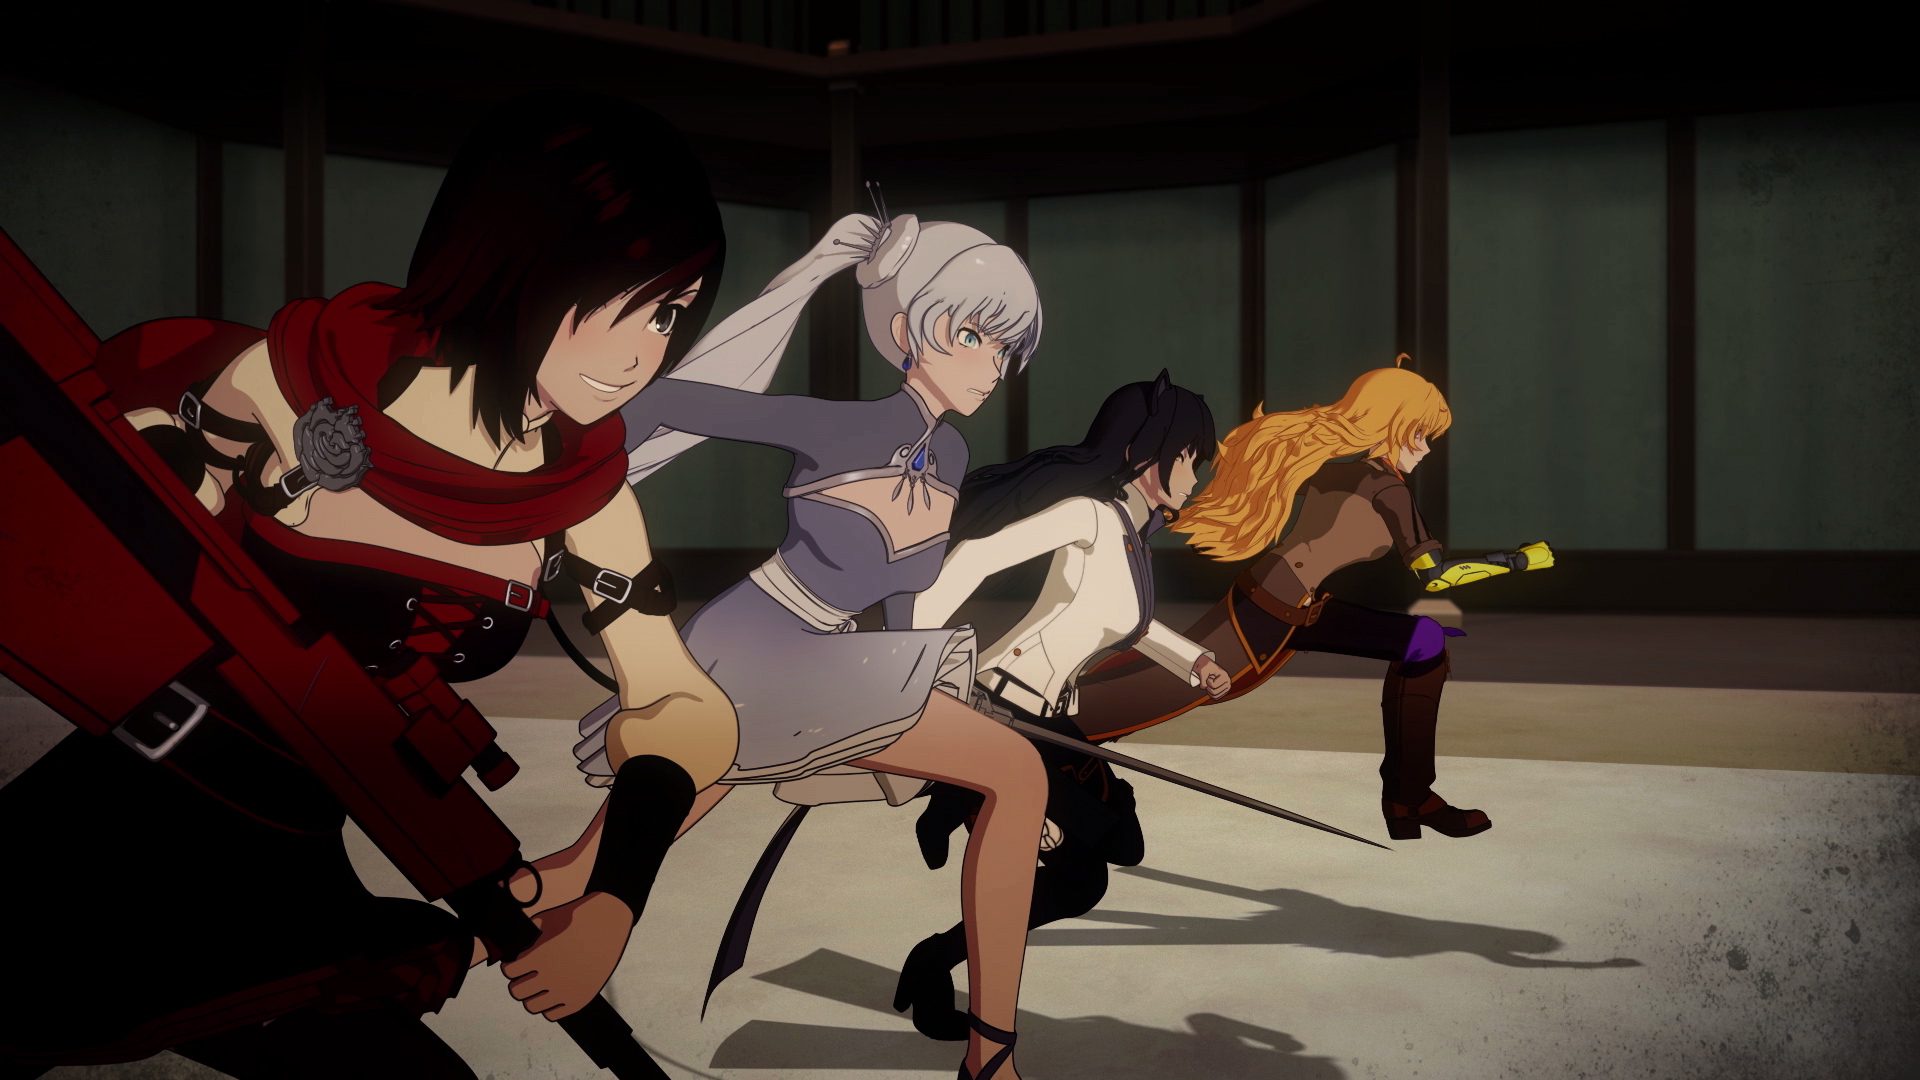 RWBY gets mobile game in Amity Arena